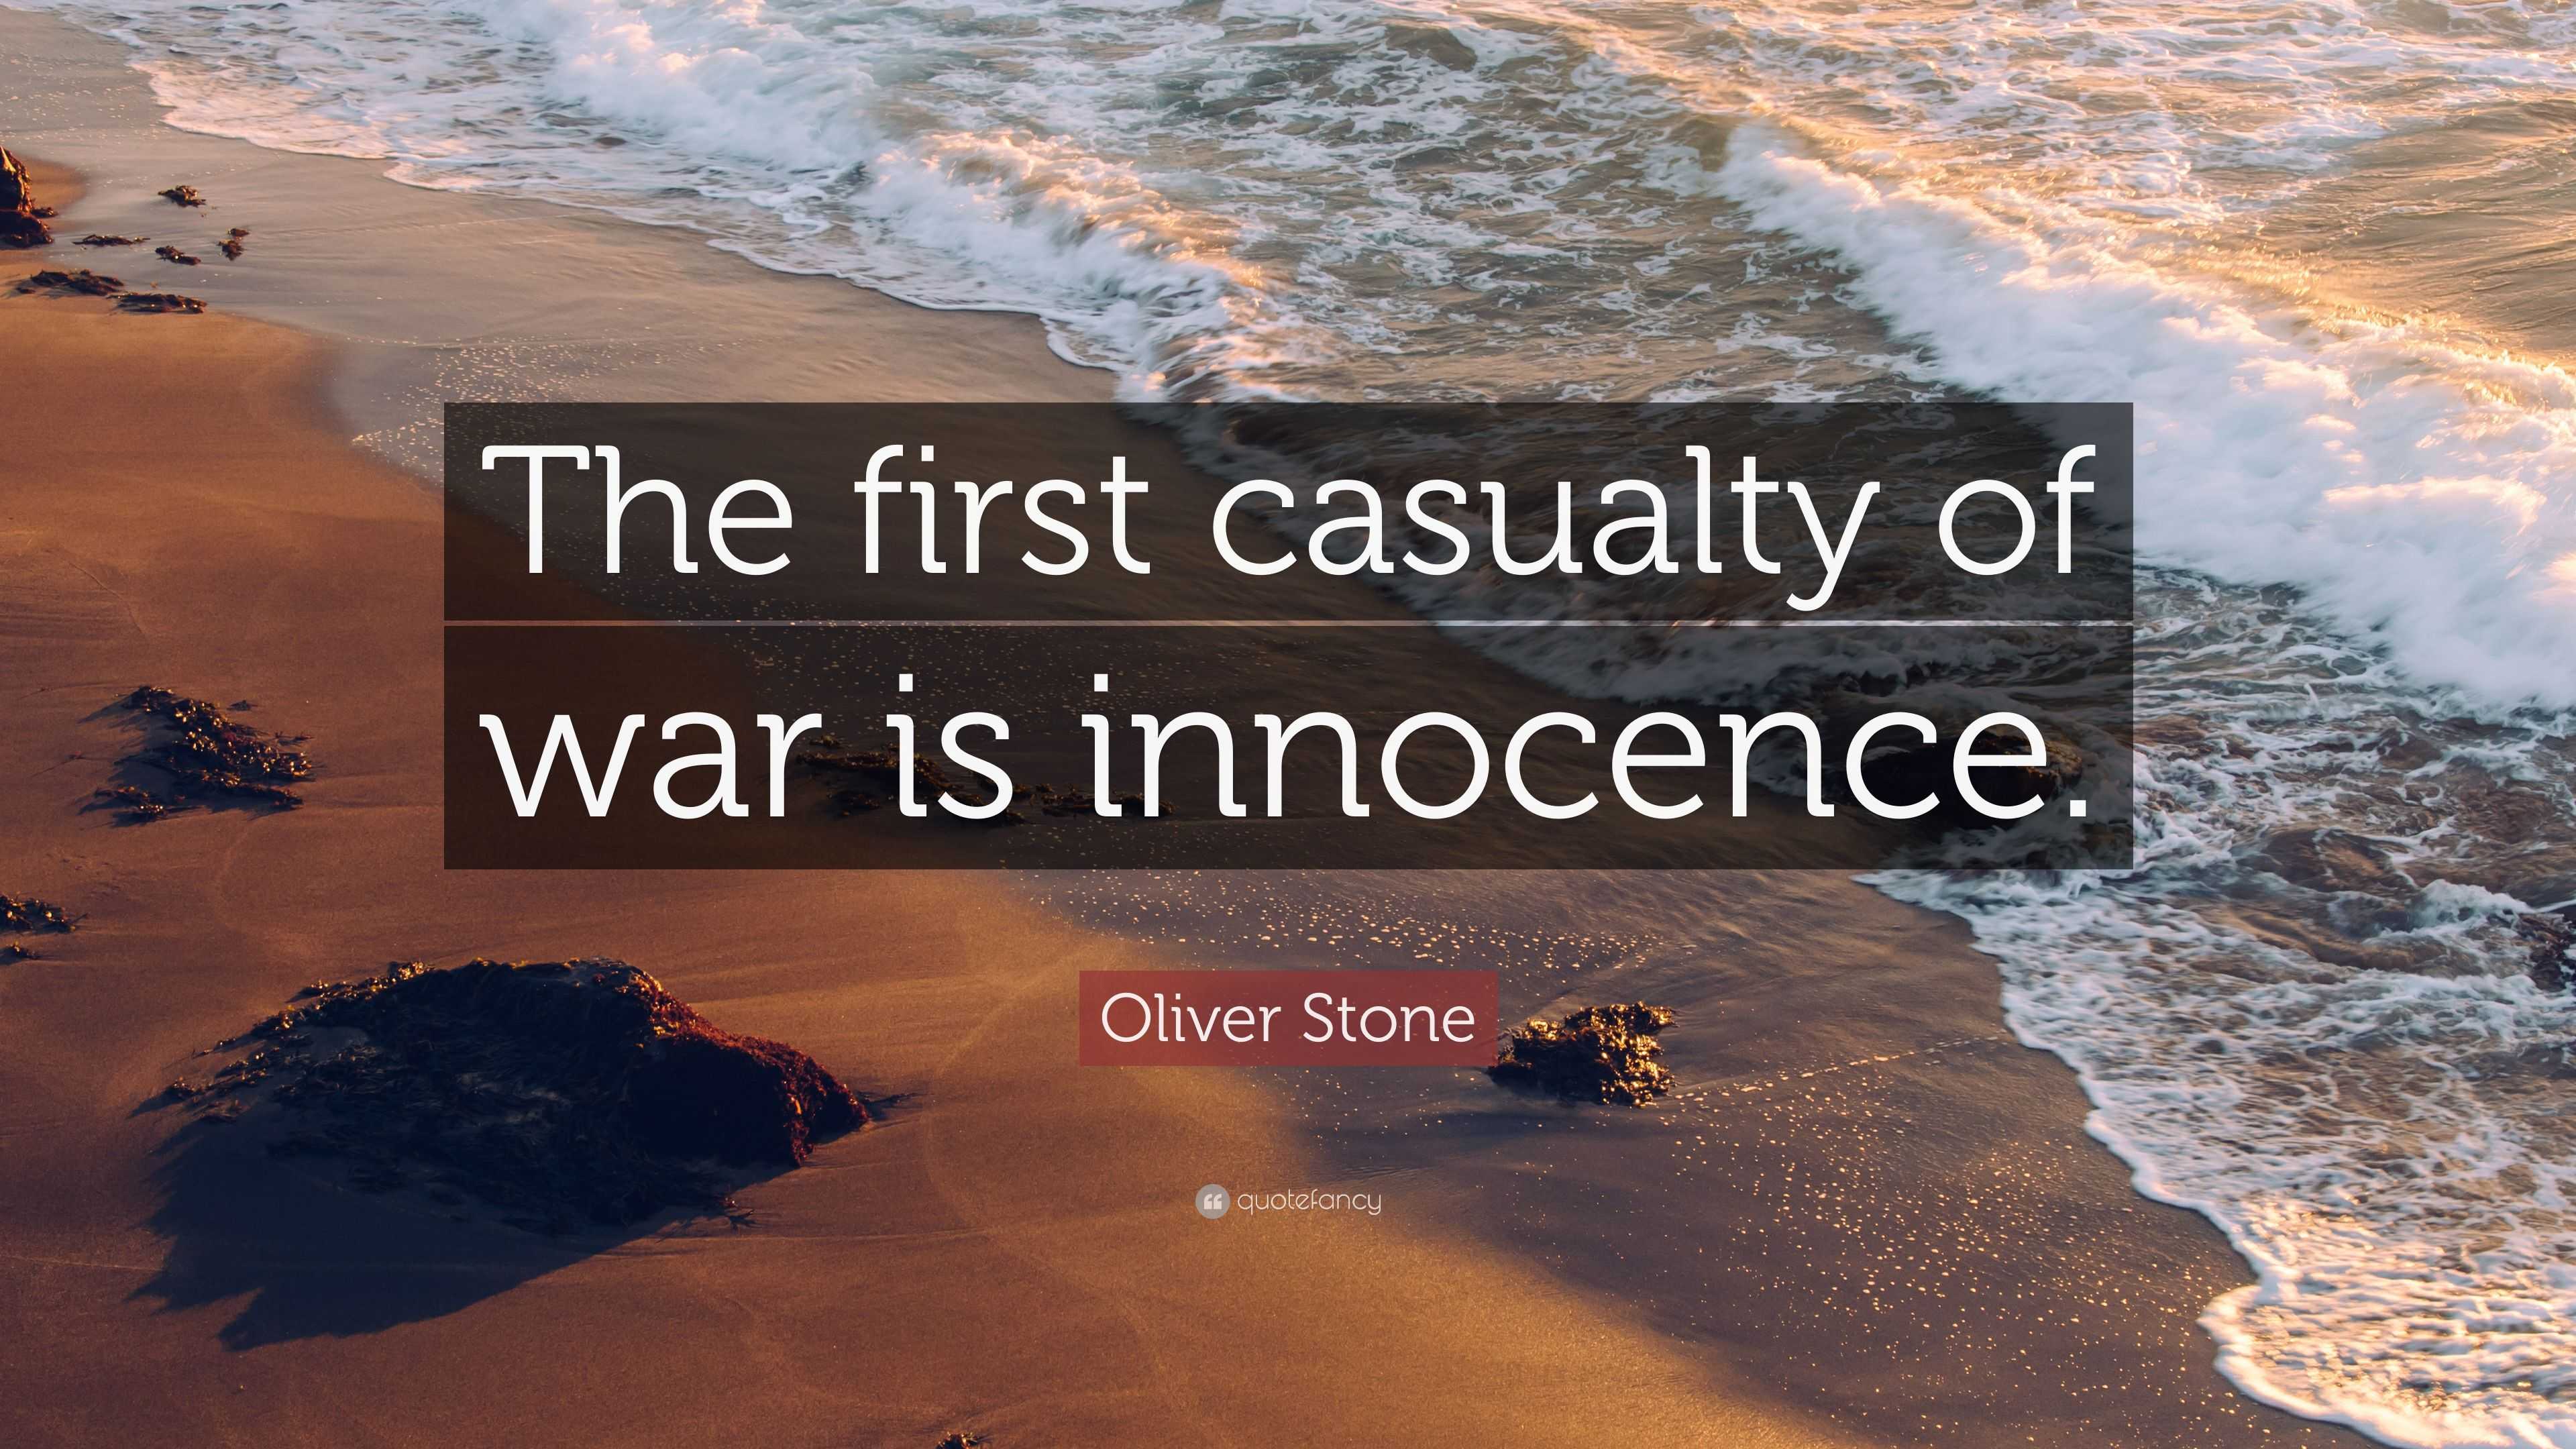 Oliver Stone Quote: “The first casualty of war is innocence.” (10